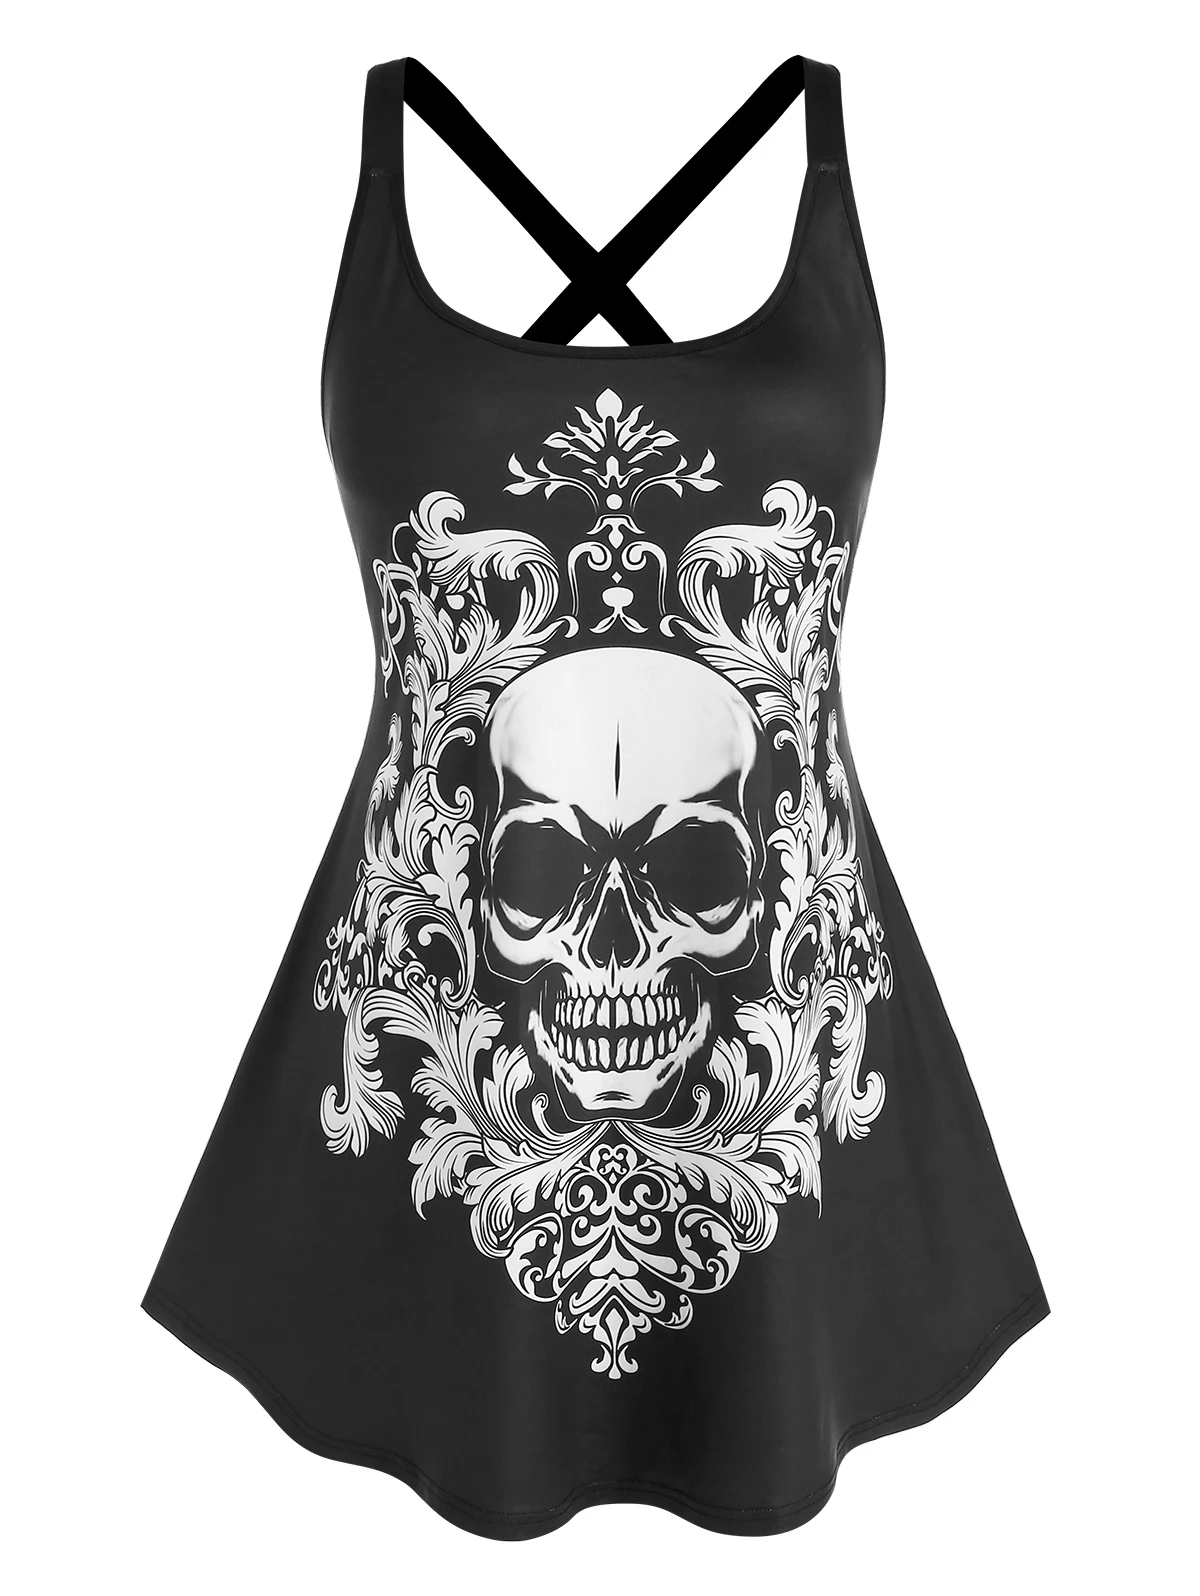 New Womens Plus Size Baggy T Shirt Ladies Sleeveless Back Cut Out Skull Vest Top